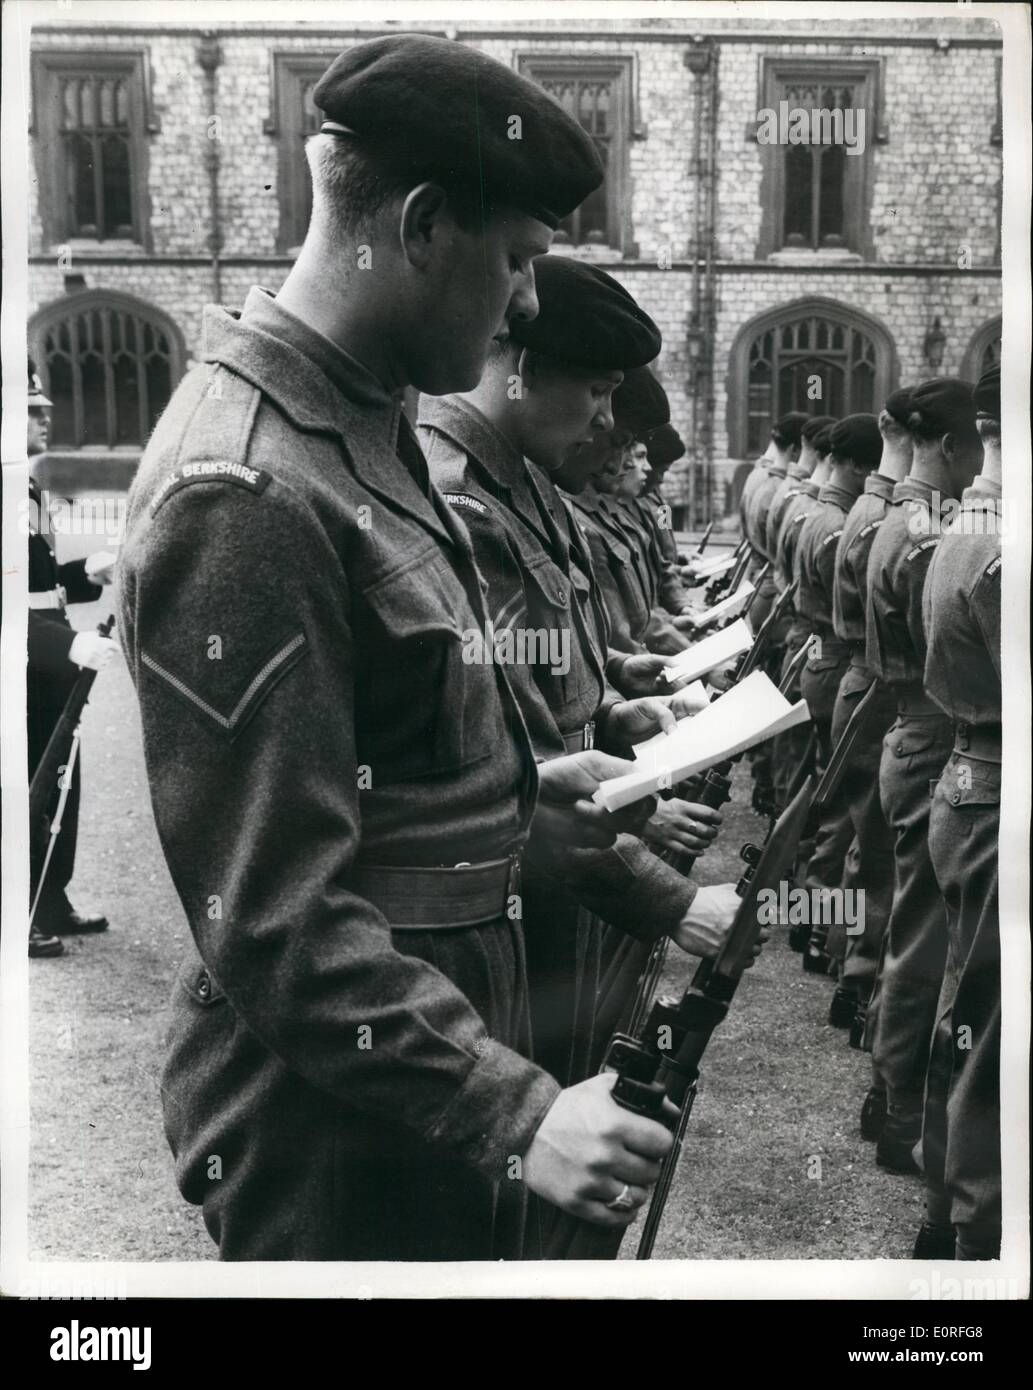 May 05, 1959 - Laying up of colours of the Royal Berkshire Regiment: The Colour of the 1st. Bn. The Royal Bershire Regiment, were today laid up in the State Apartment at Windsor Castle. The Royal Bershire Regiment and the Wiltshire Regiment are to amalgamente at Albany Barracks, Newport, Isle of Wight. on June 9th, to form The Duke of Ediburgh's Royal Regiment (Berkshire and Wiltshire). Photo shows men of the Royal Berkshire Regiment, singing hymns during the service at Windsore Castle today. Stock Photo